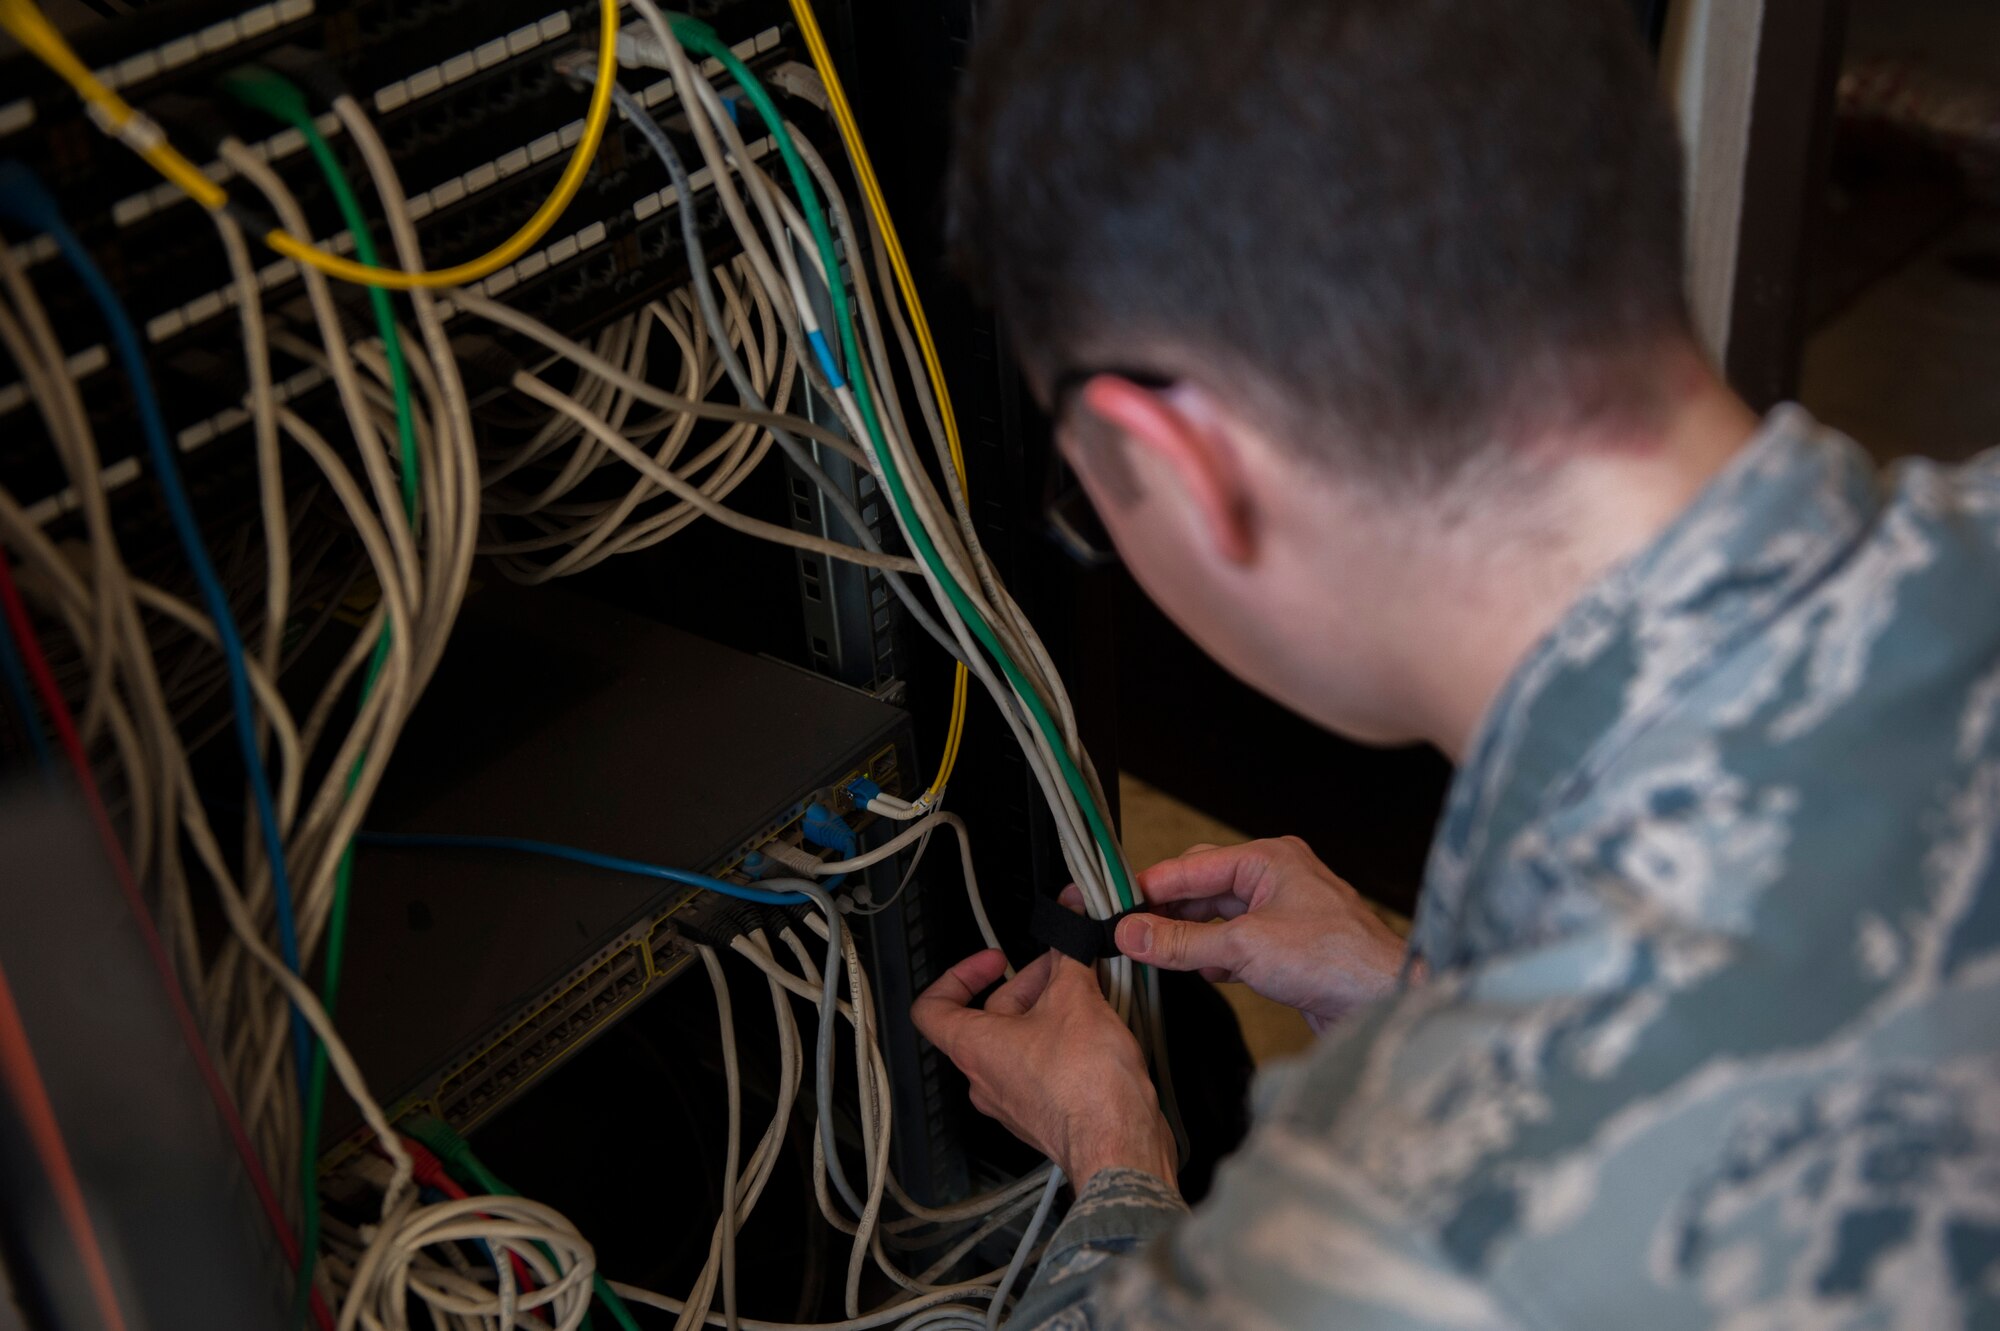 U.S. Air Force Airman 1st Class Nathan Bryant, 39th Communications Squadron cyber transport technician, ties wires together Sept. 19, 2016, at Incirlik Air Base, Turkey. Bryant performed a preventative maintenance inspection to ensure the equipment was organized and compliant with standards. (U.S. Air Force photo by Airman 1st Class Devin M. Rumbaugh)